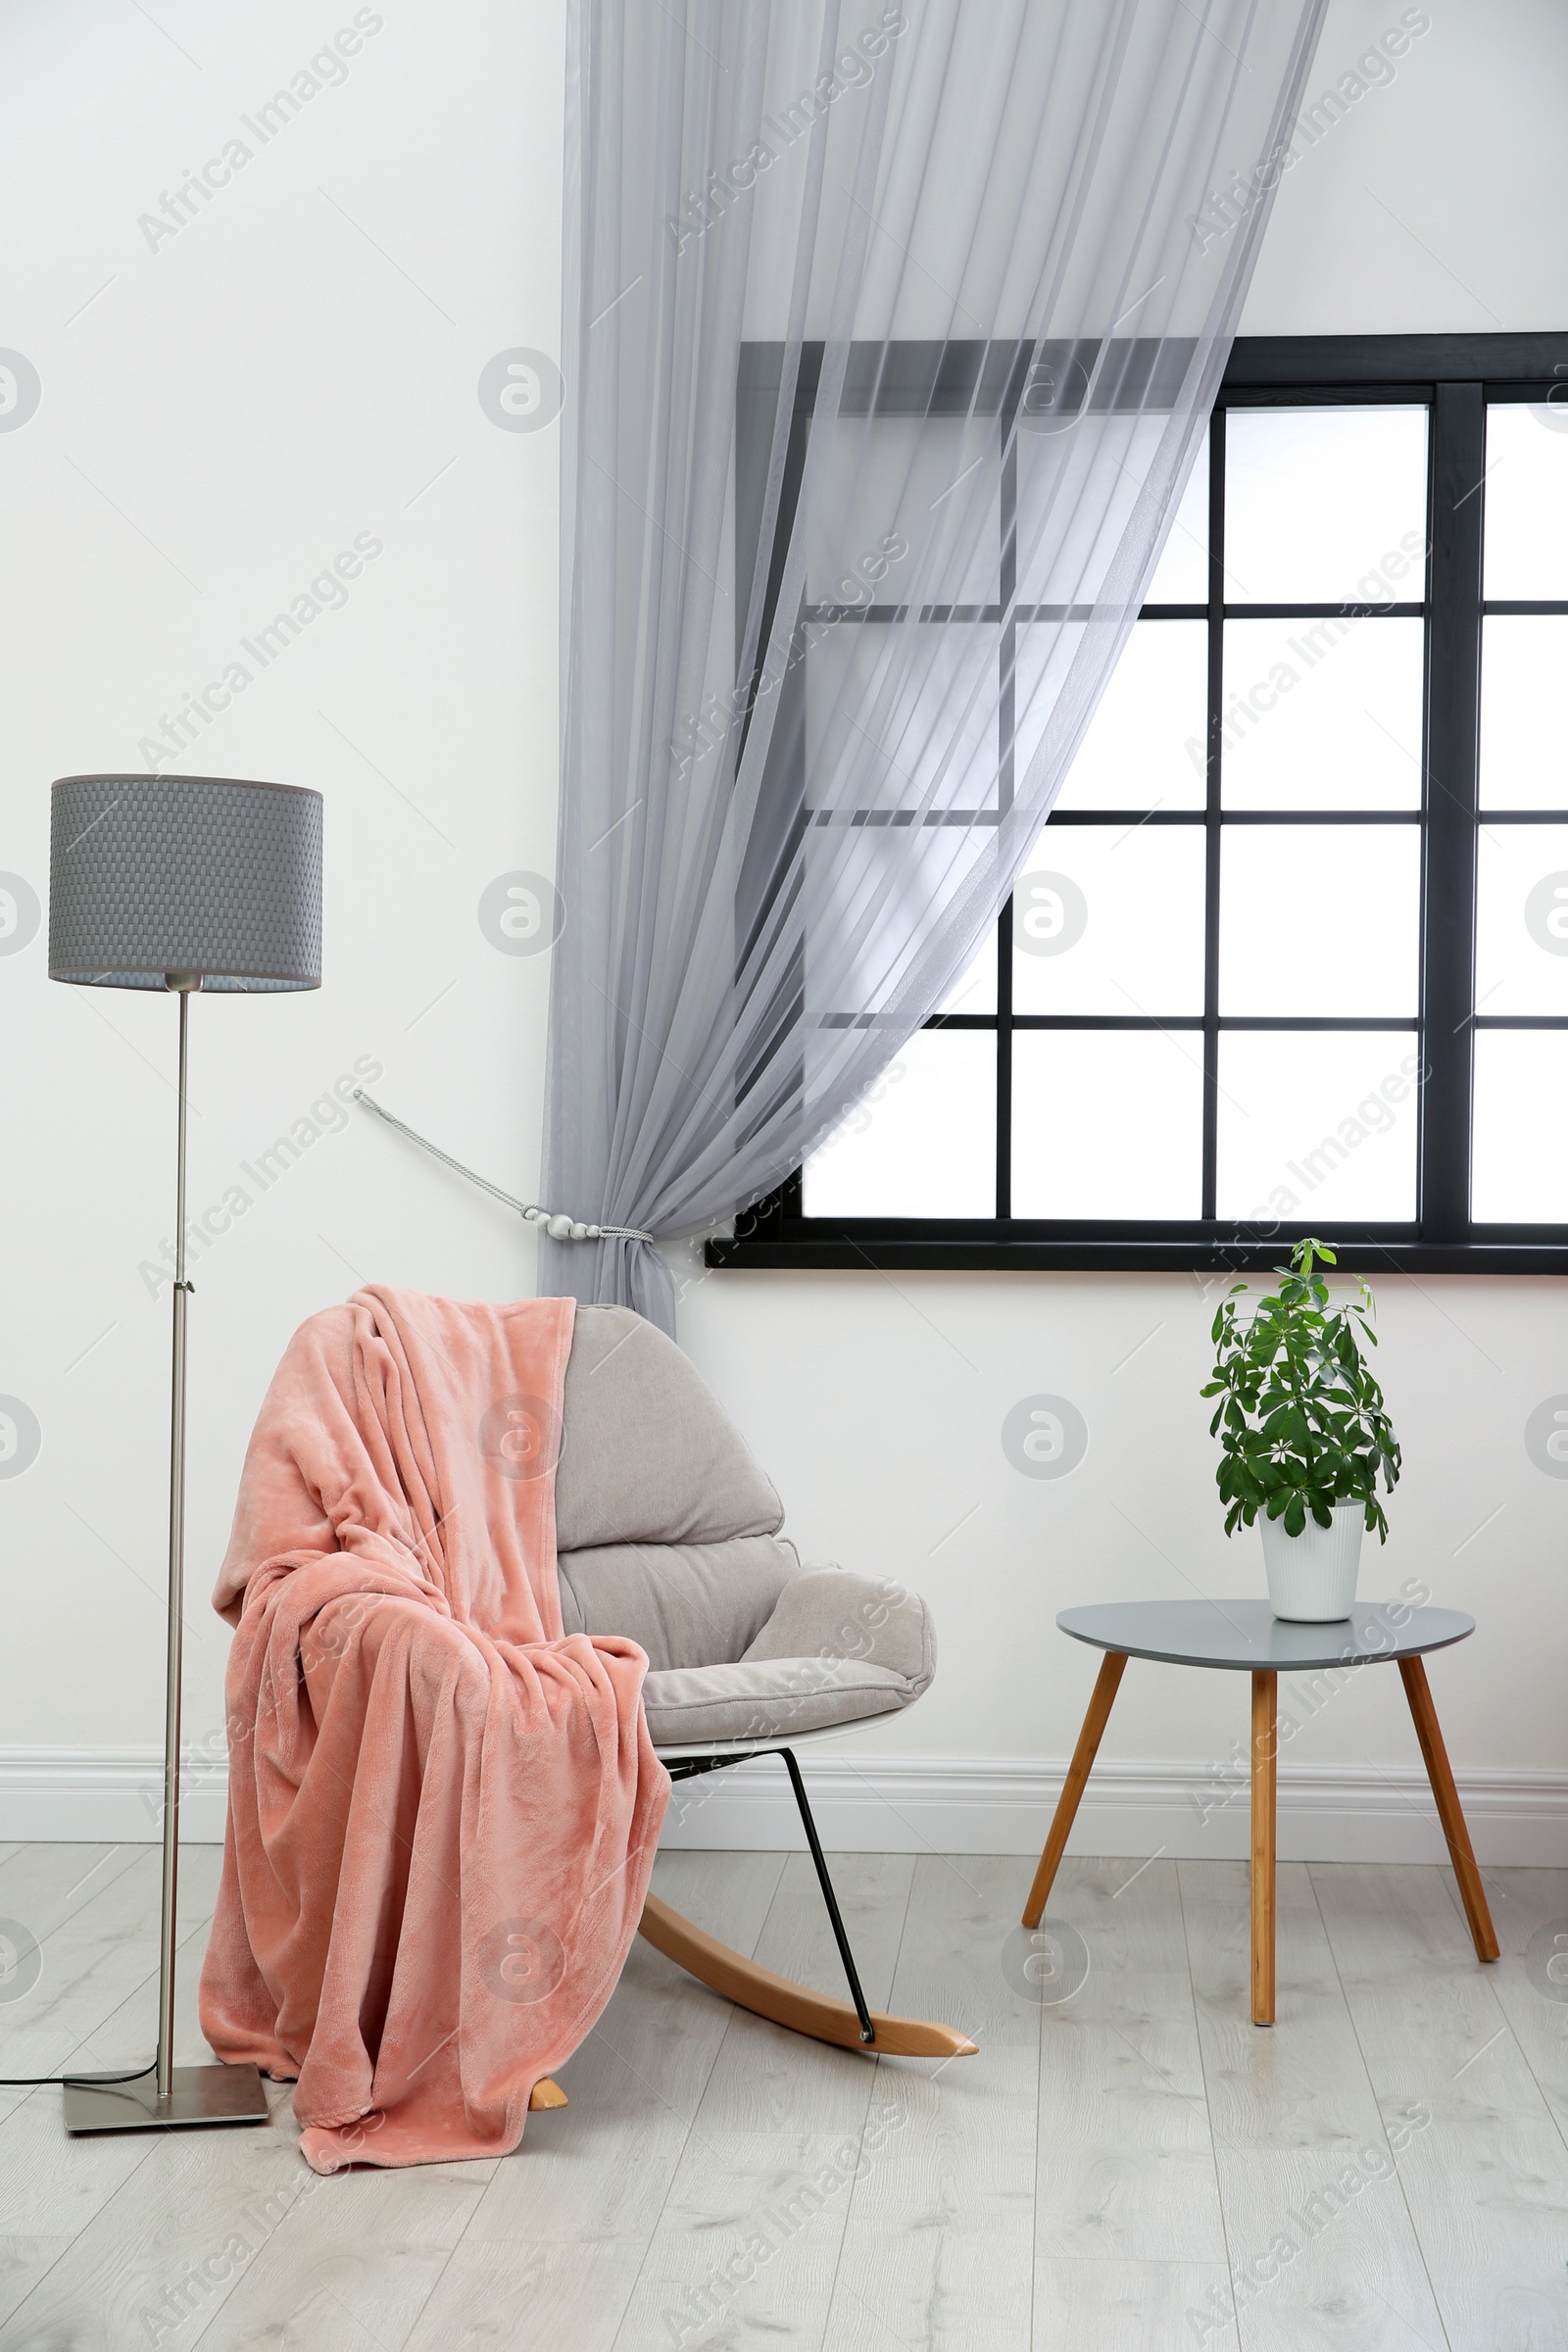 Photo of Modern furniture and window curtain in stylish room interior